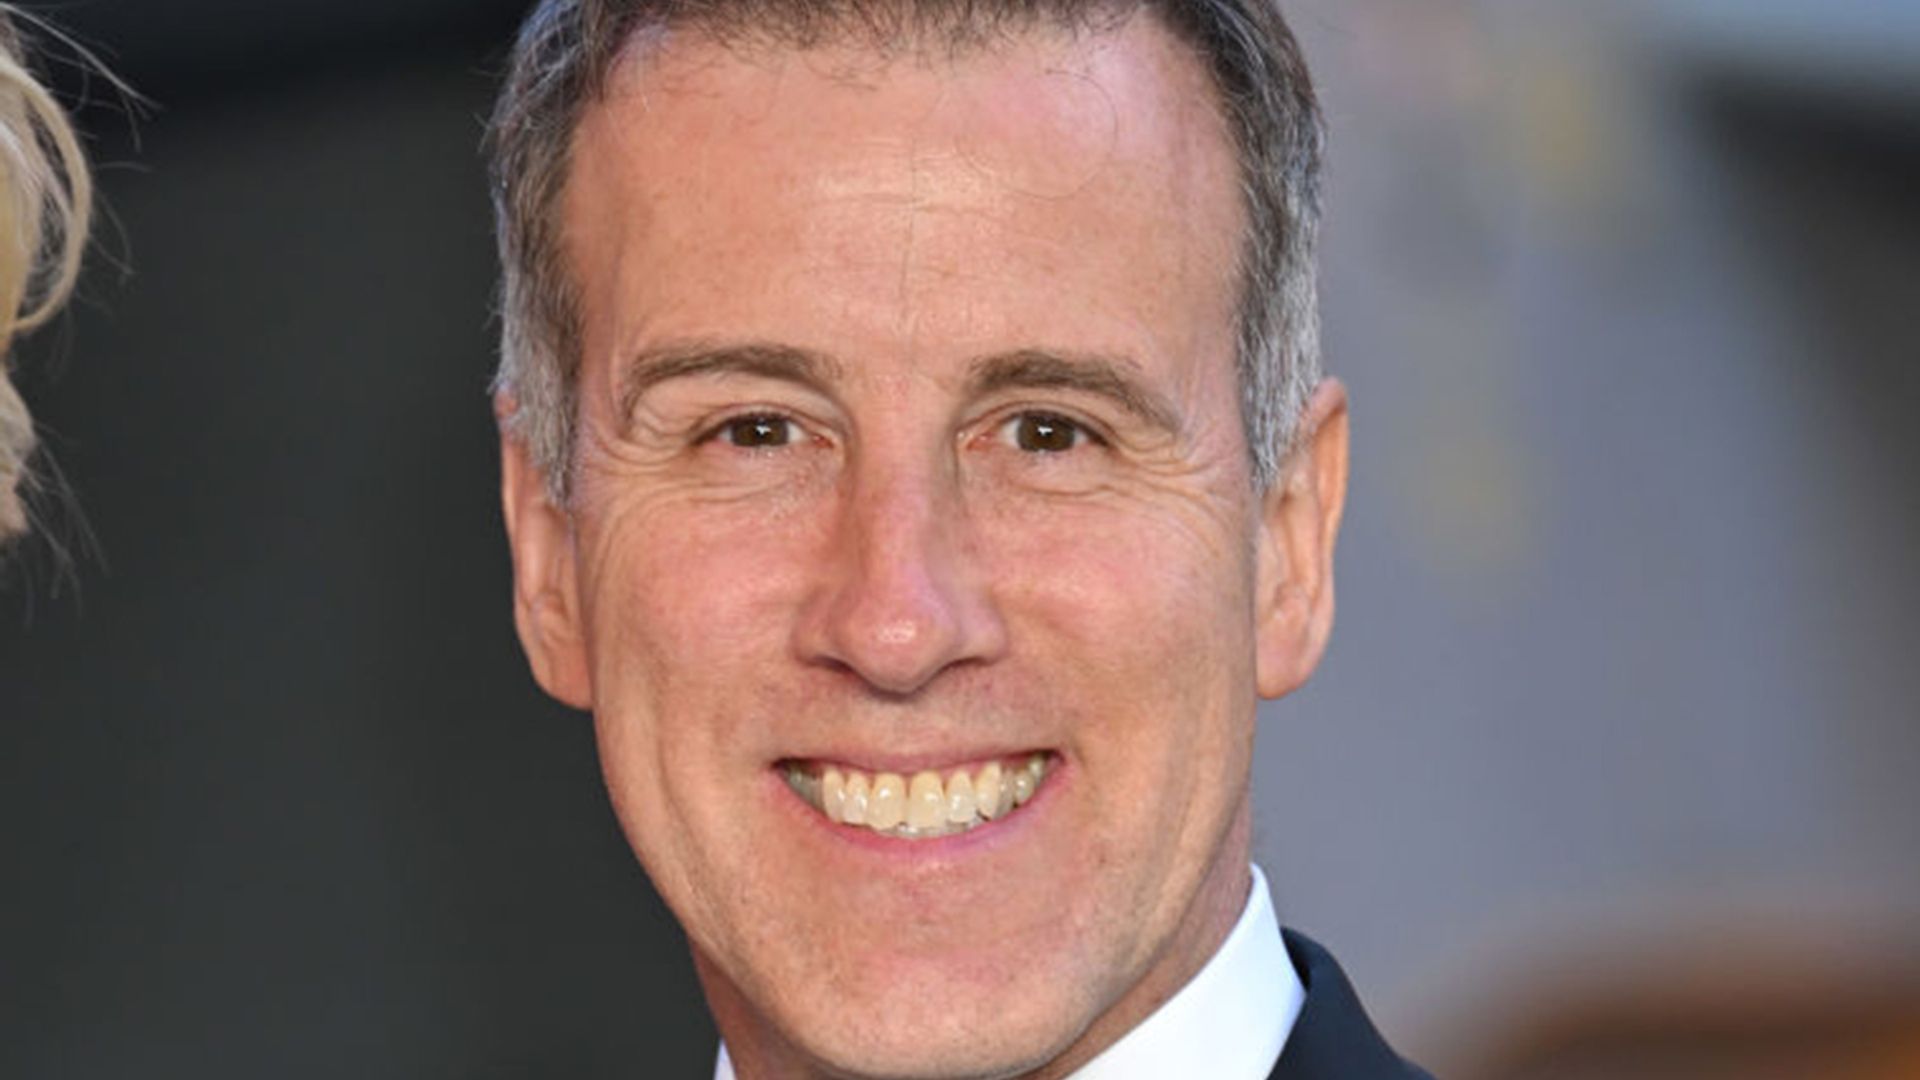 What is Strictly star Anton du Beke's real name?